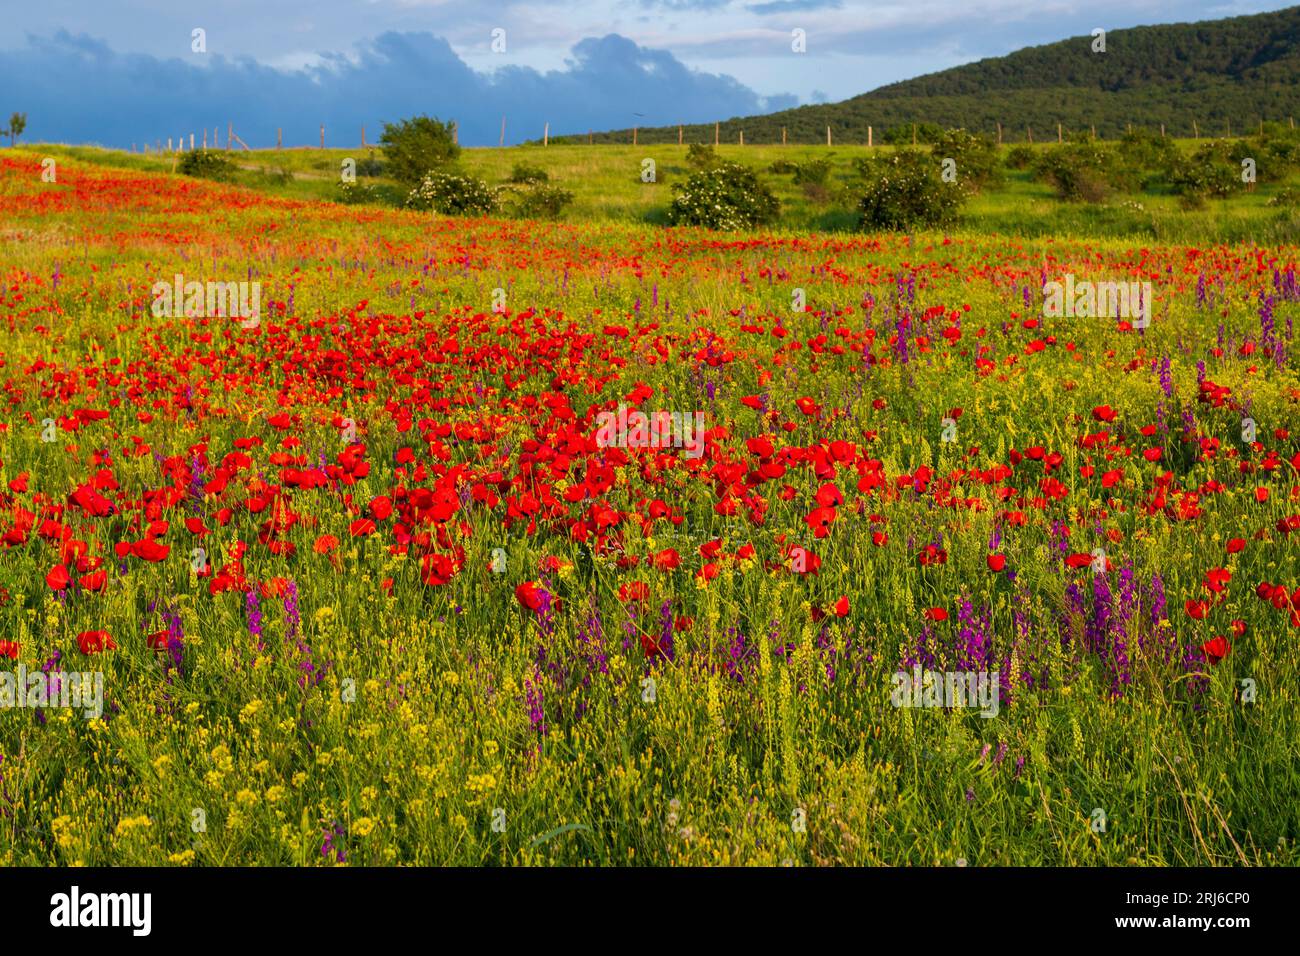 A scenic view of red poppy flowers in a green field Stock Photo